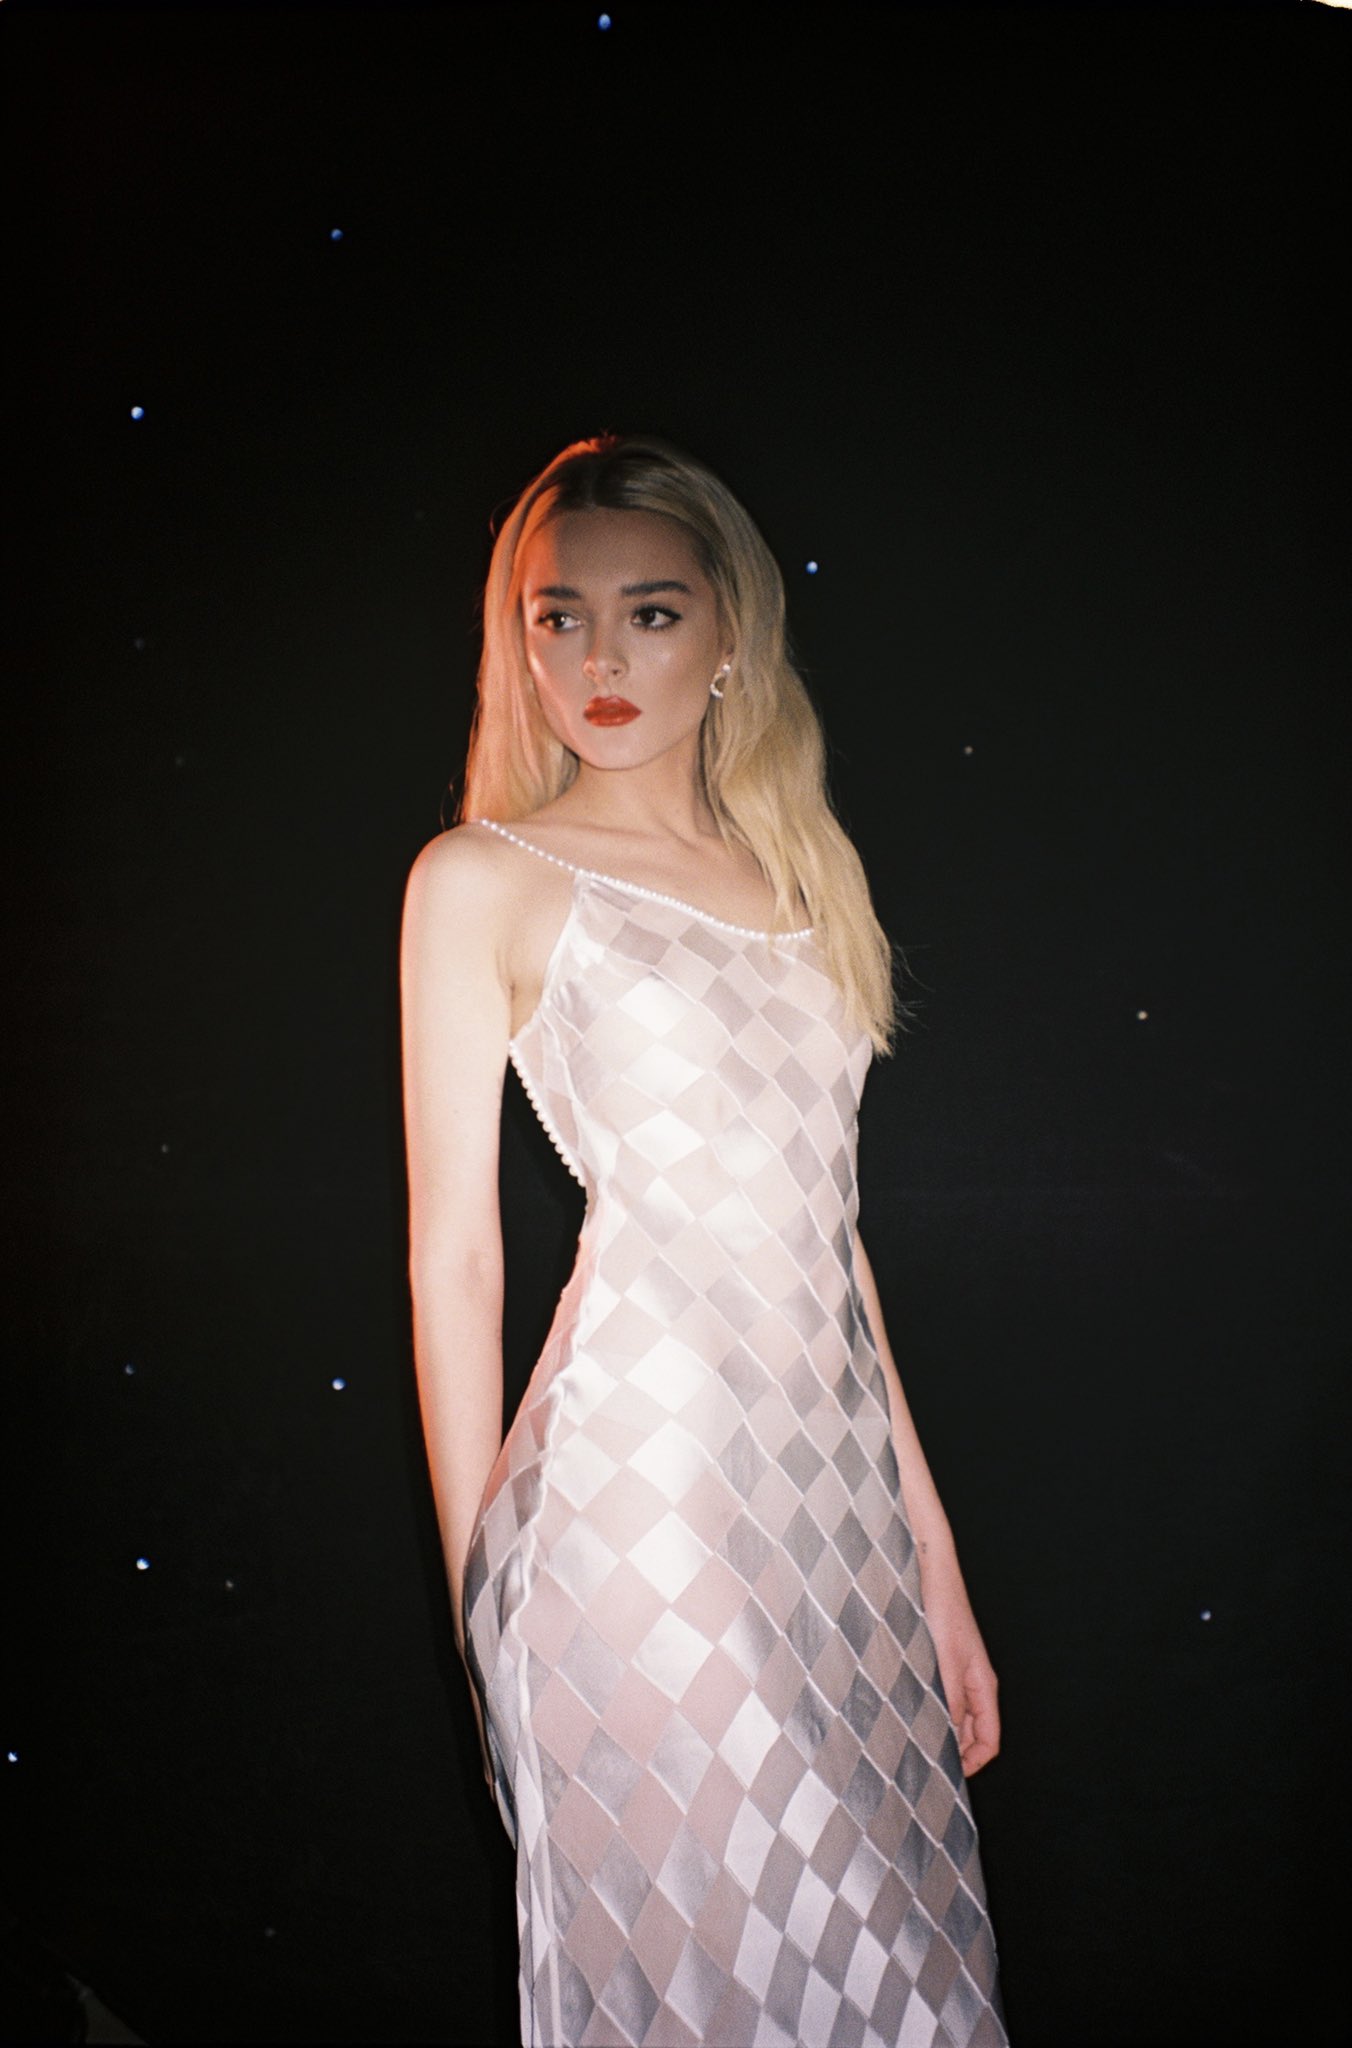 Charlotte Lawrence Wears the Viral Dress! - Photo 18